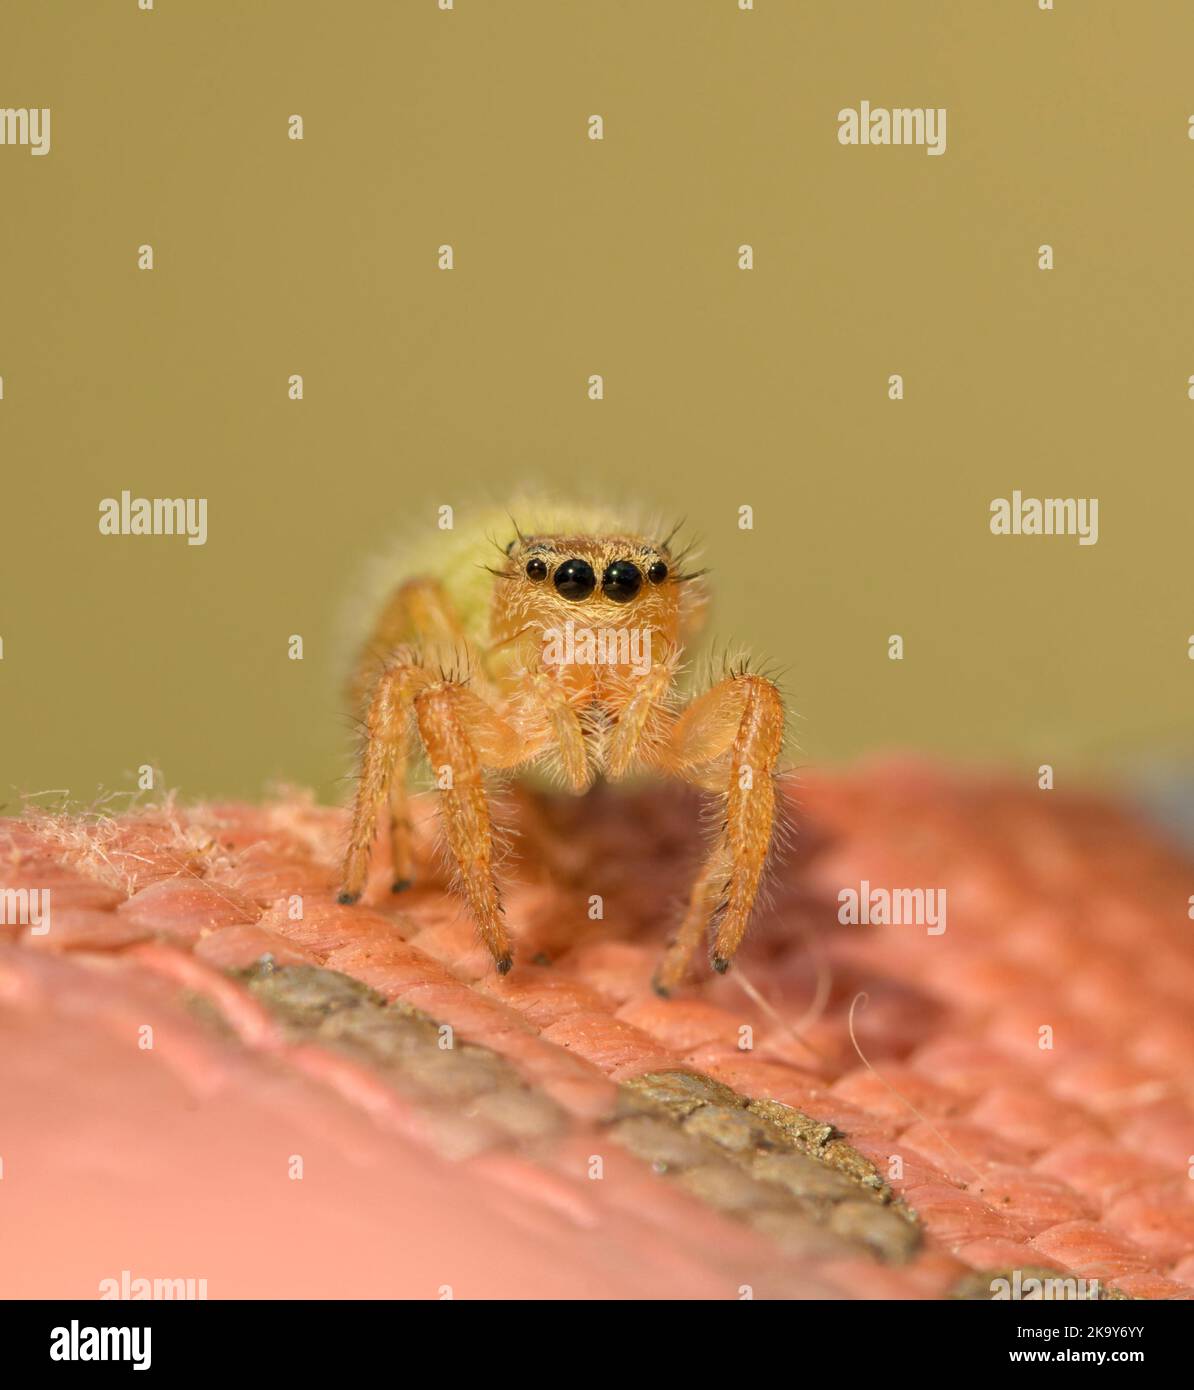 Adorably cute immature female Phidippus pius jumping spider on pink nylon with muted green background Stock Photo